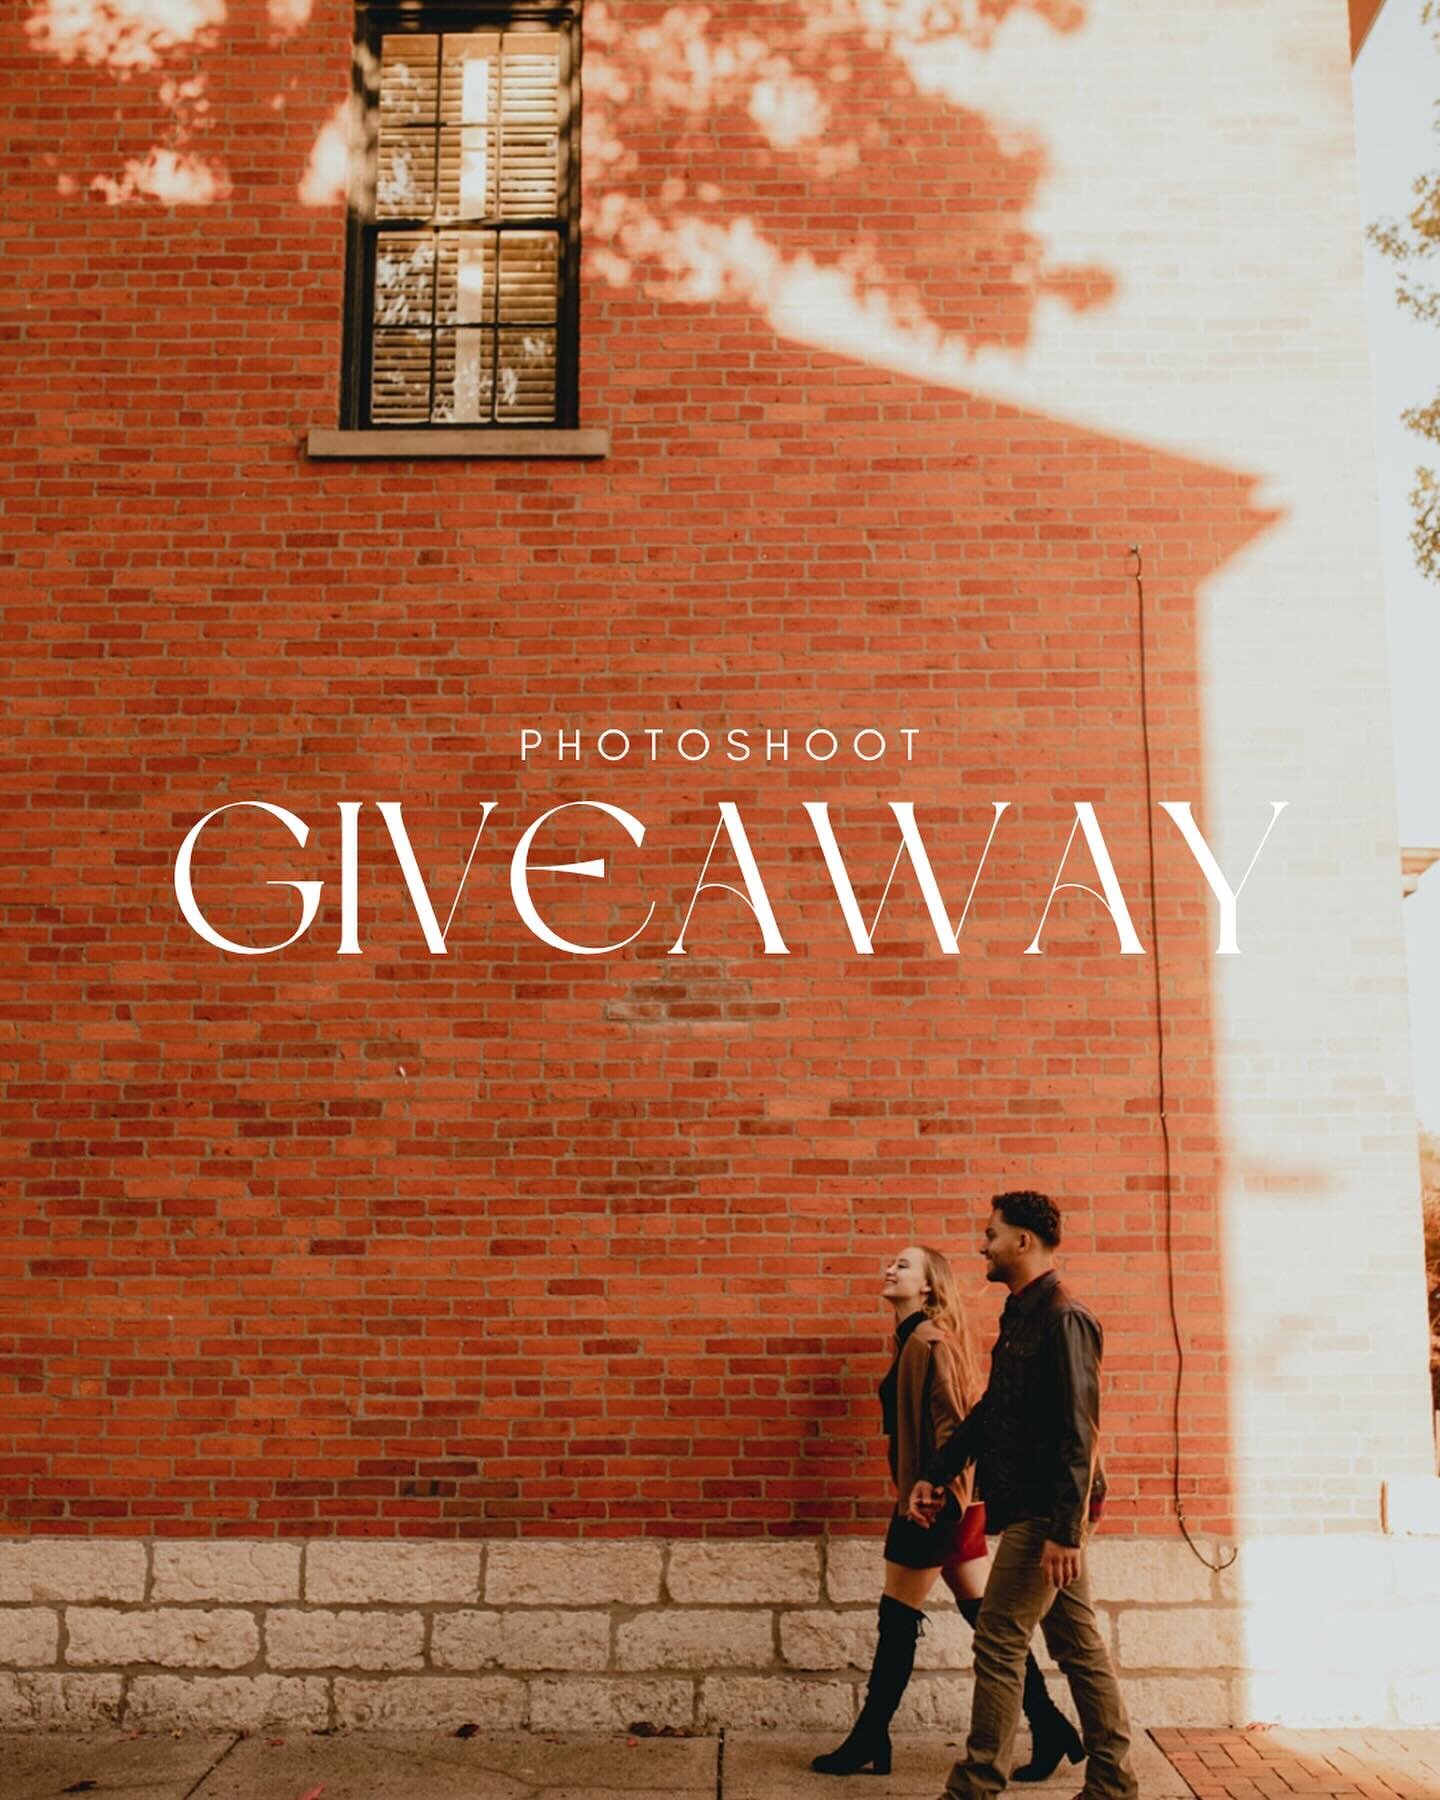 It&rsquo;s giveaway time!! 🦢✨ It&rsquo;s my birthday tomorrow and to celebrate I thought it would be so fun to host a giveaway!

You could win a free photoshoot that can be used for an engagement session, Valentine&rsquo;s photos, a family session, 